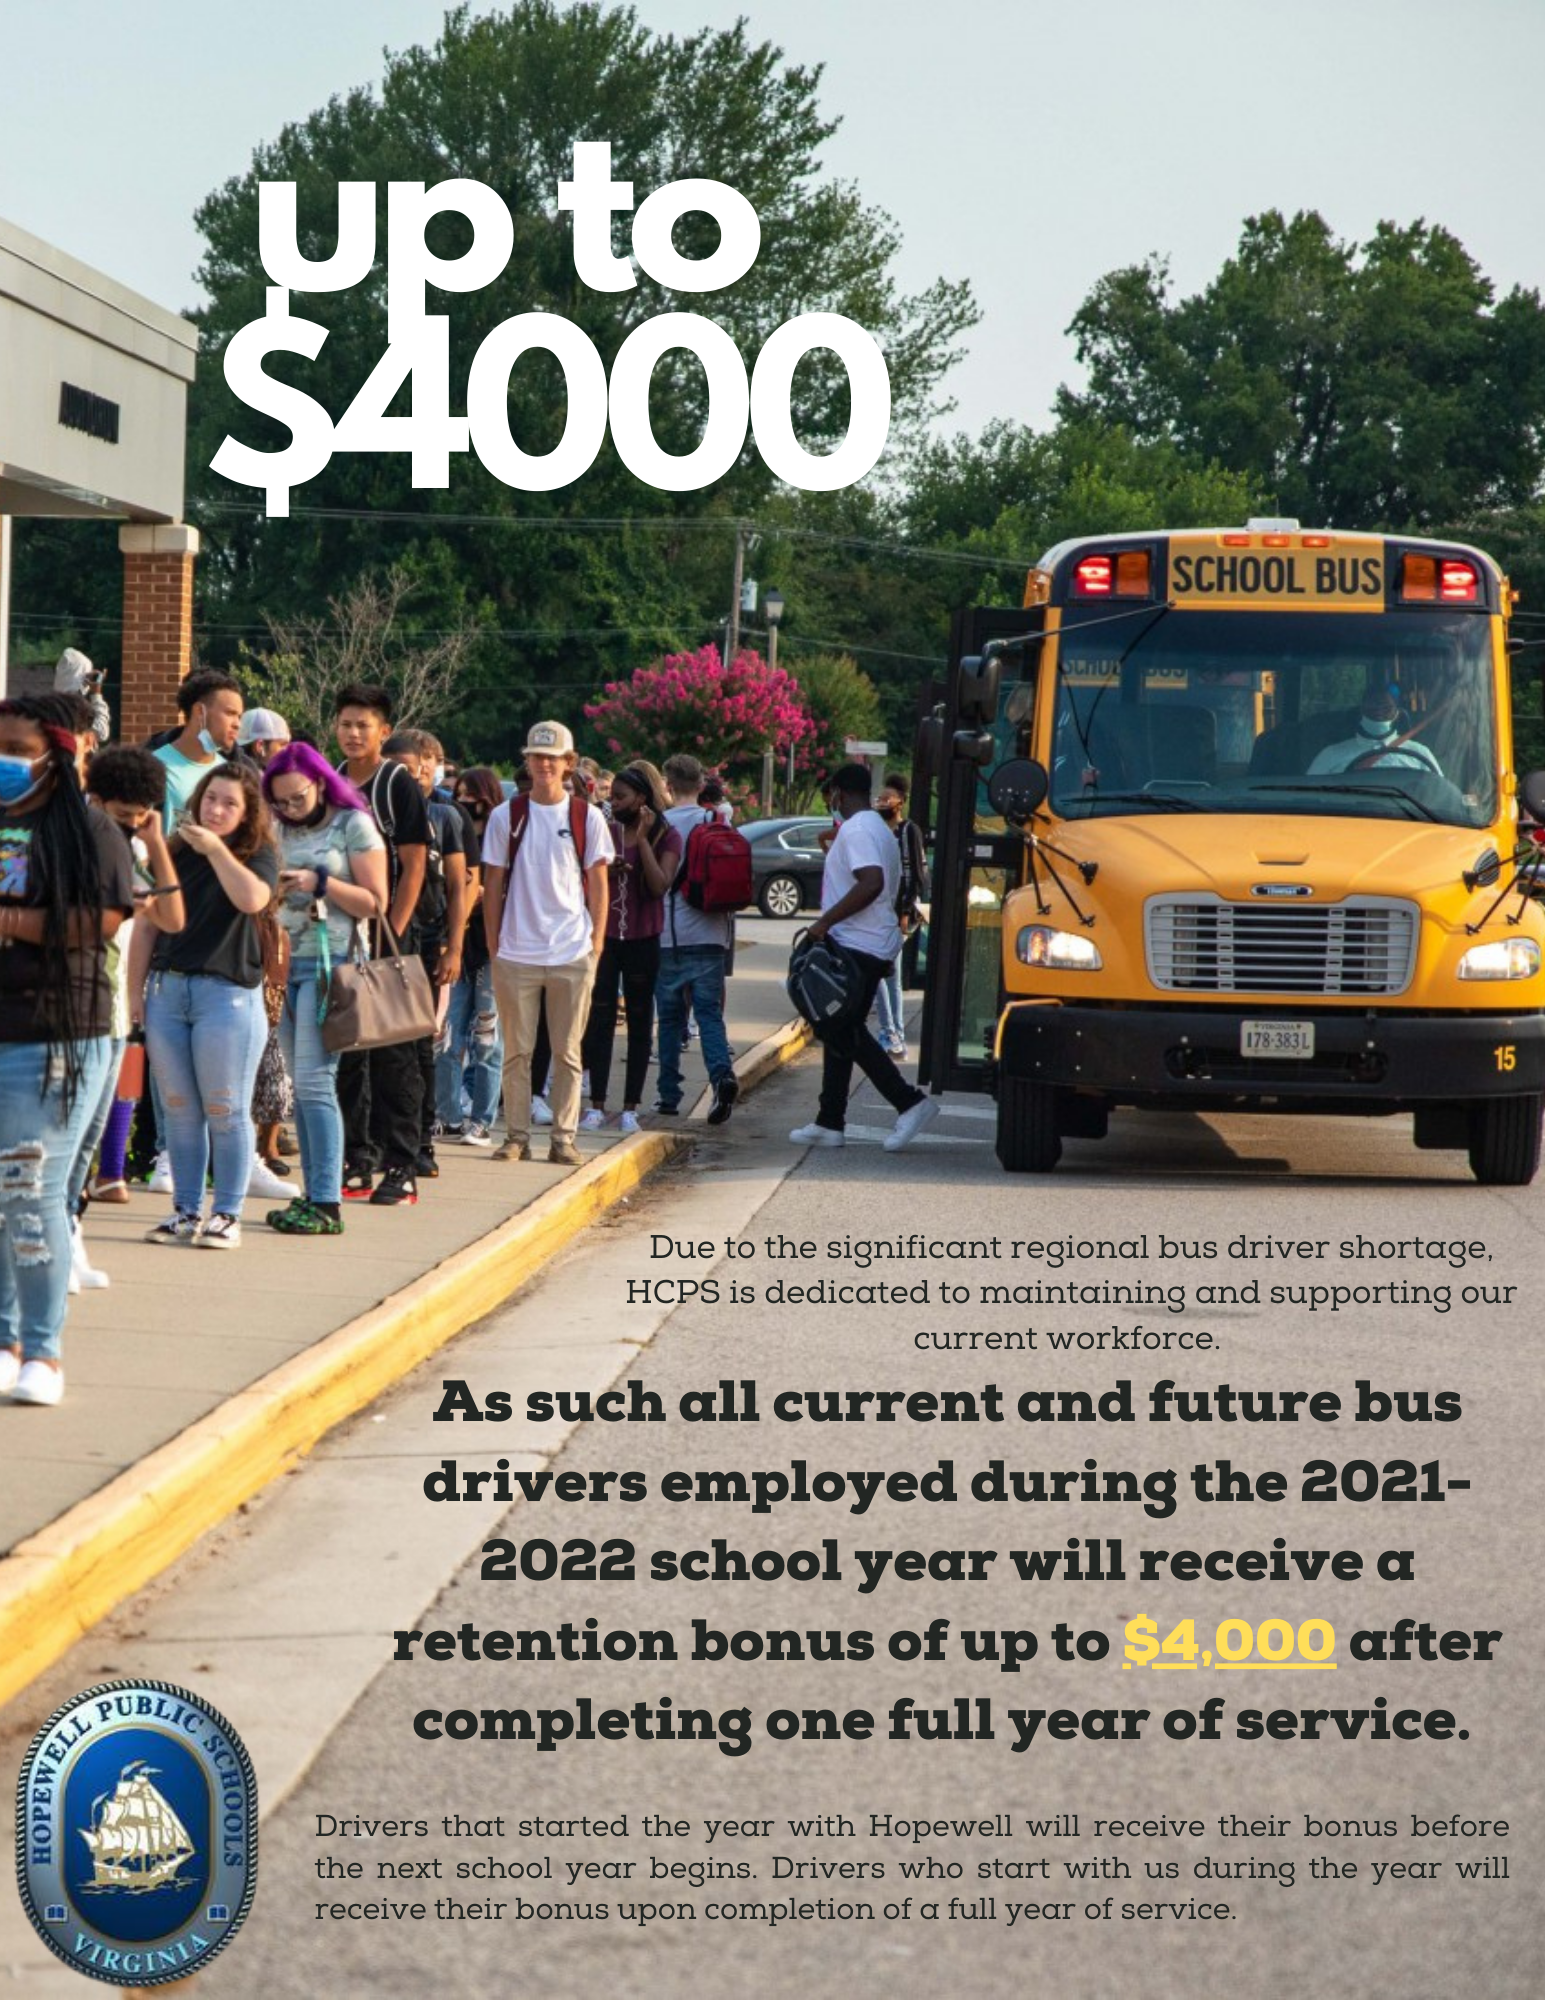 the image is a flyer regarding bus driver retention